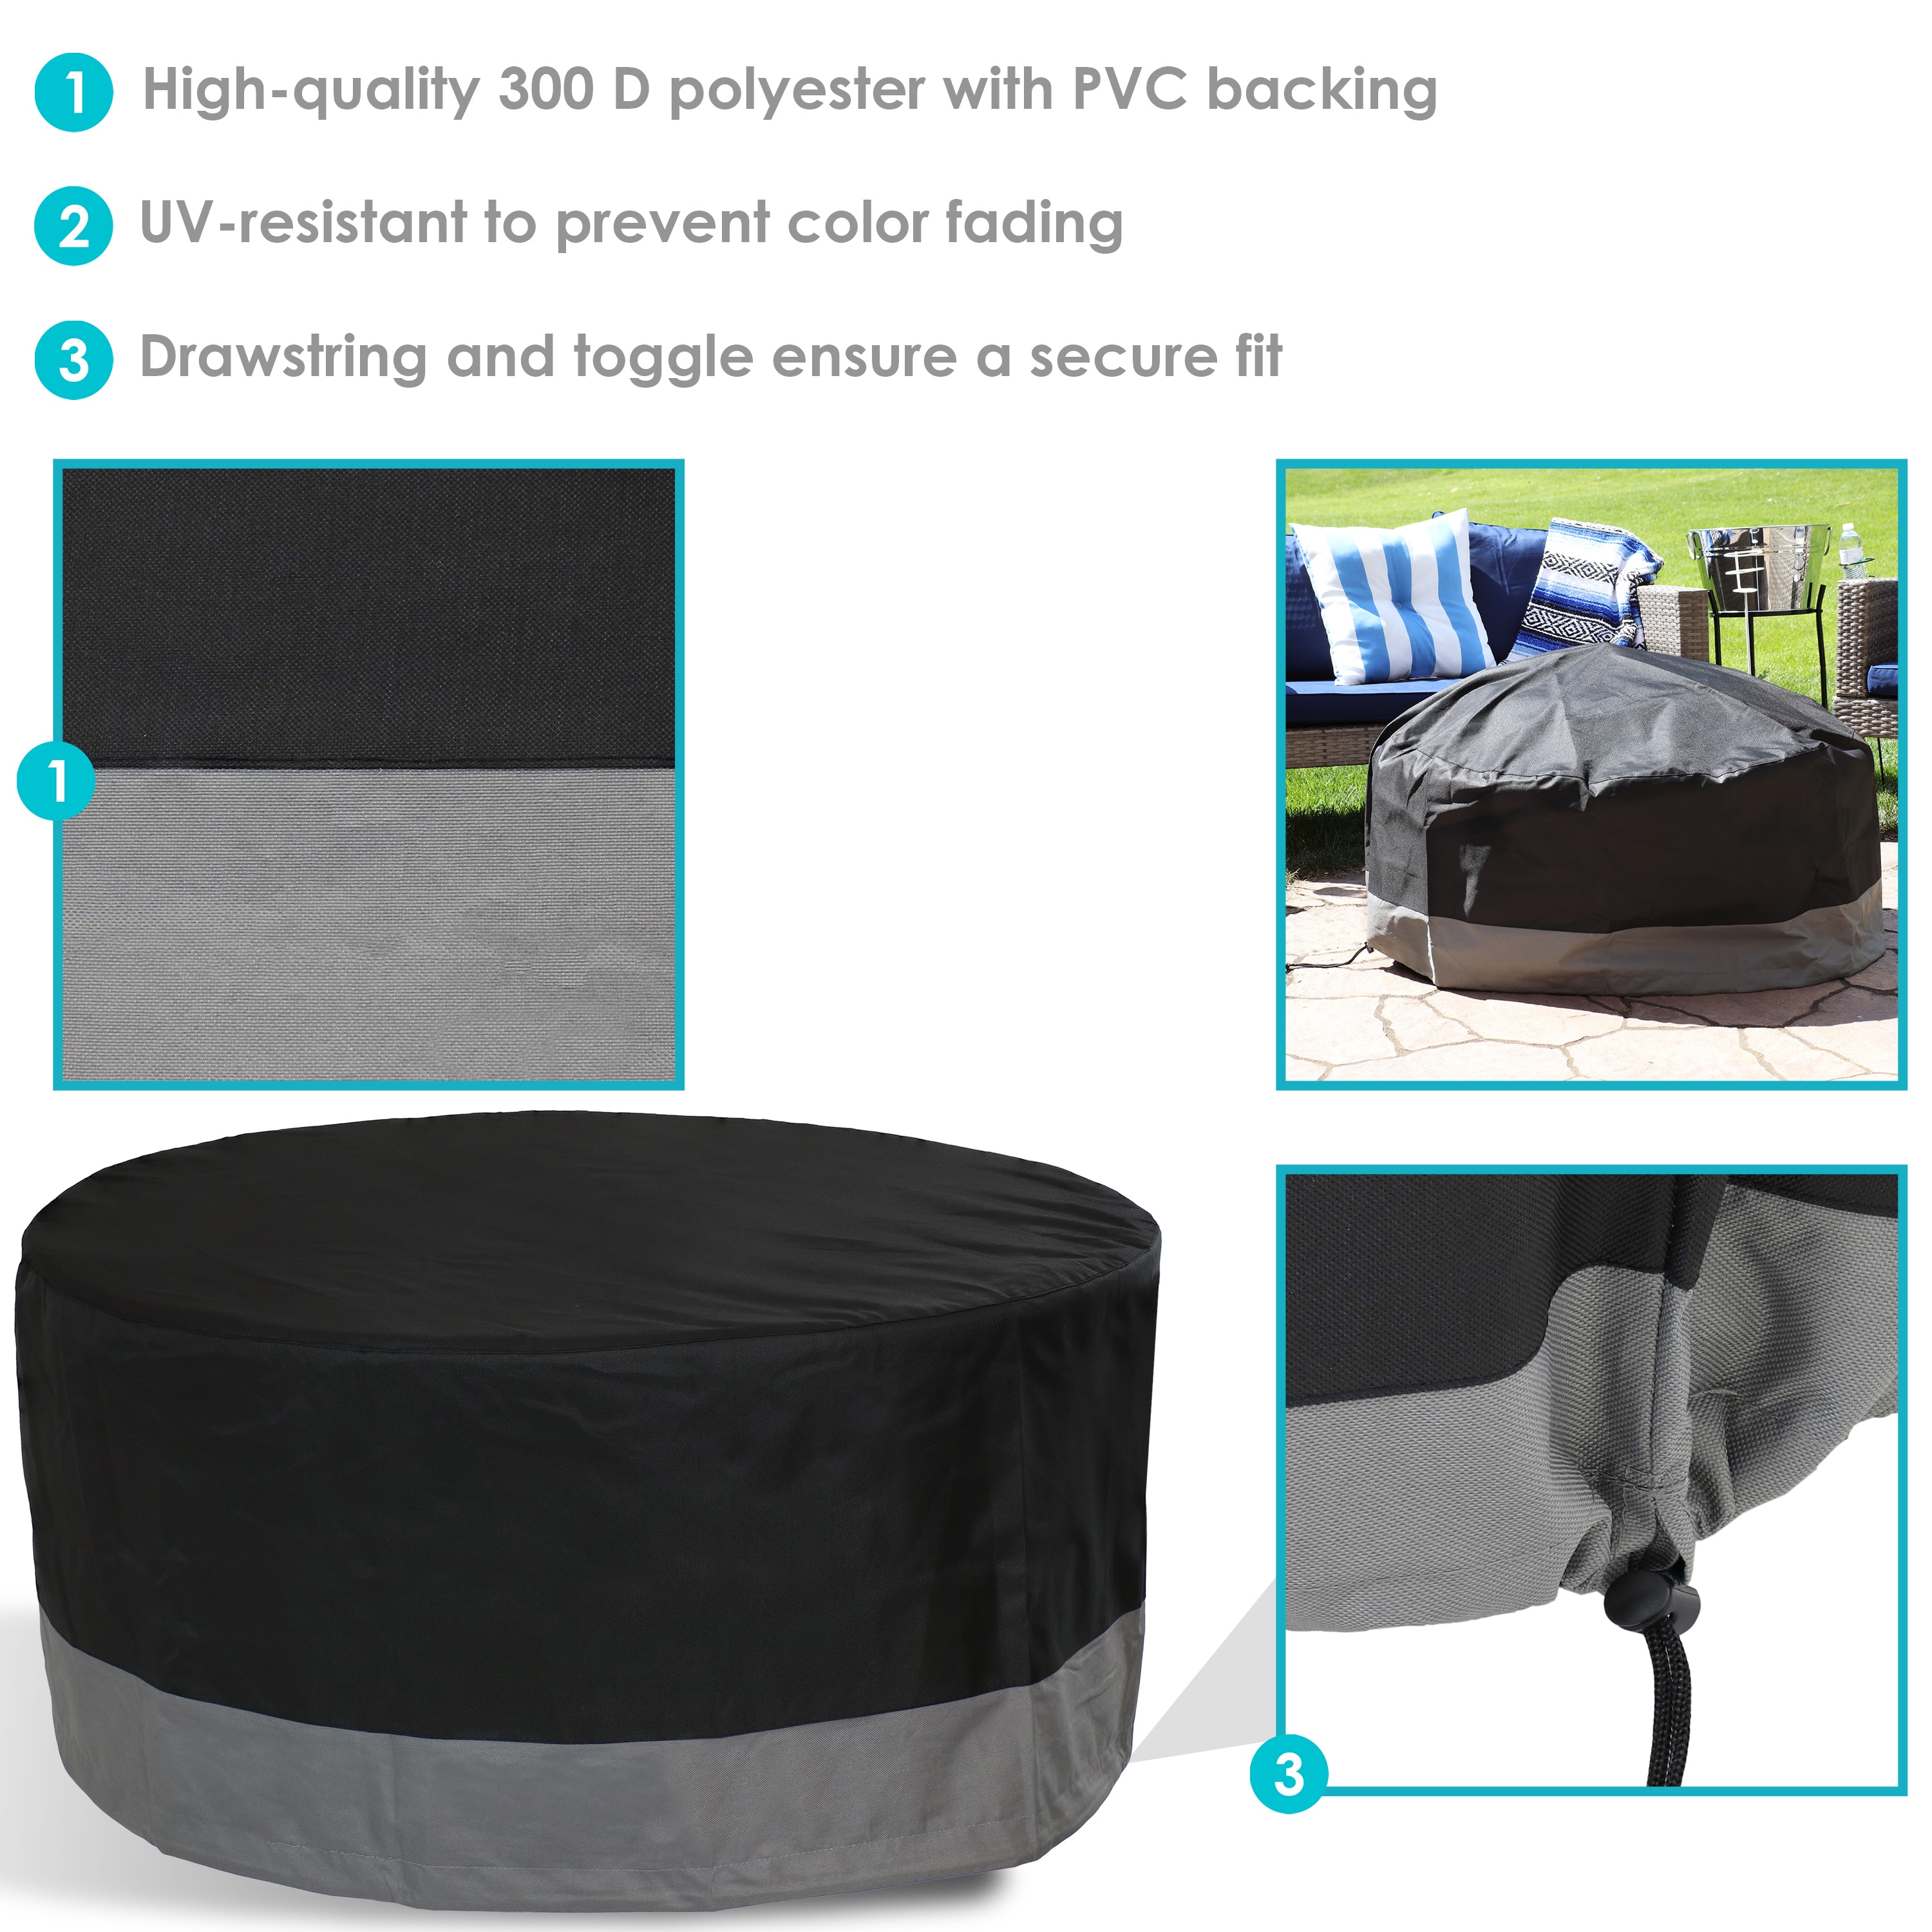 Sunnydaze Black Round Fire Pit Cover 30-Inch Heavy-Duty 300D Polyester